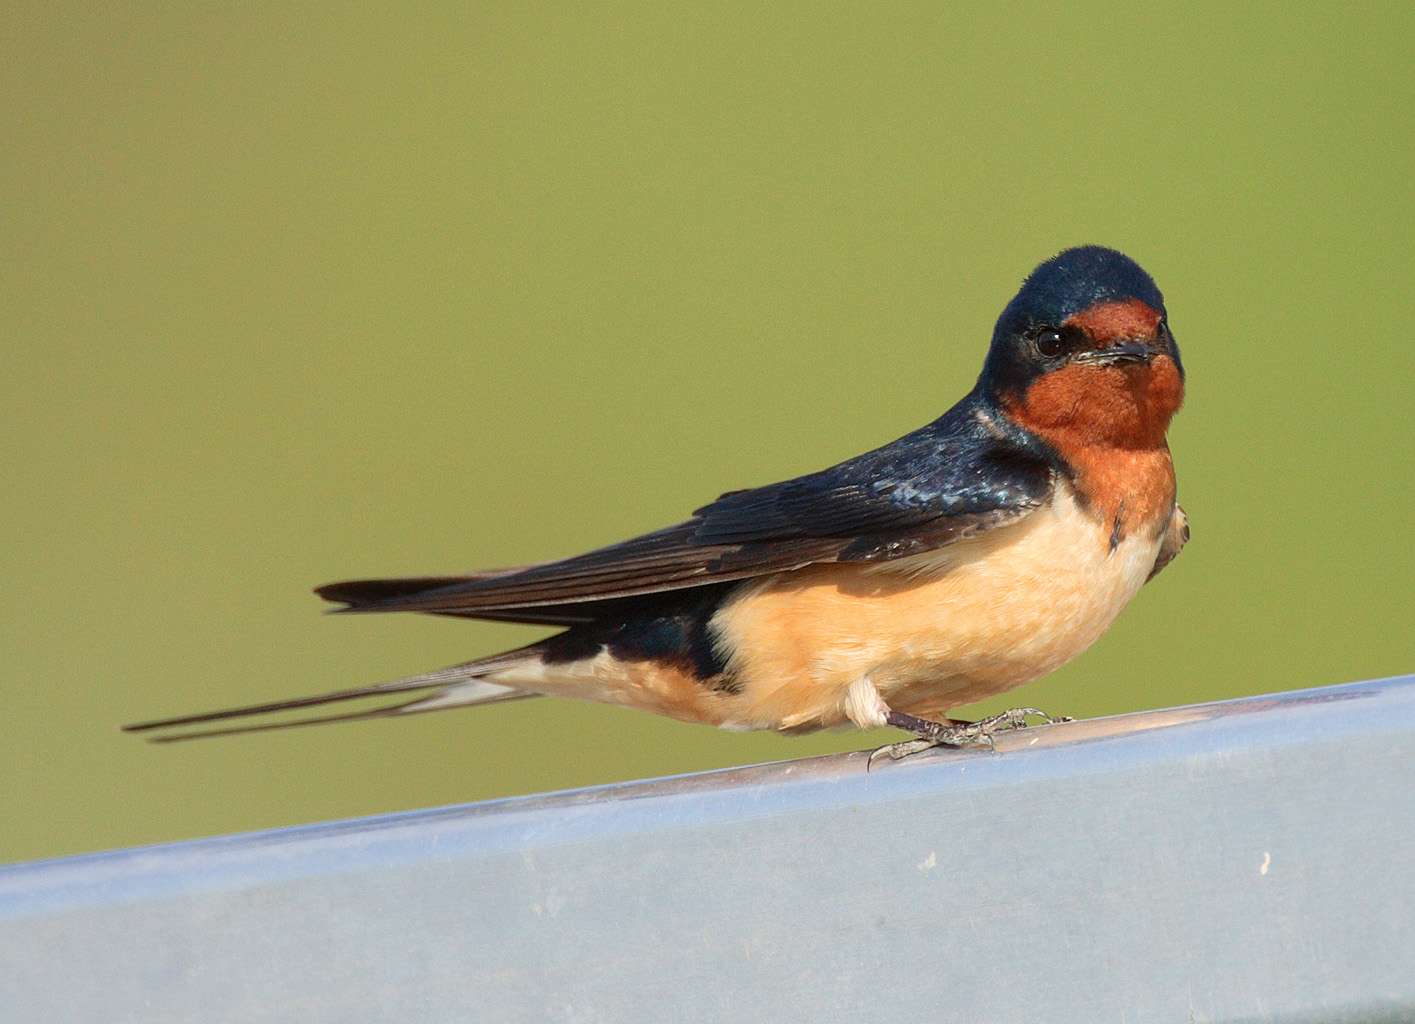 Cute Barn Swallow Photo And Wallpaper All